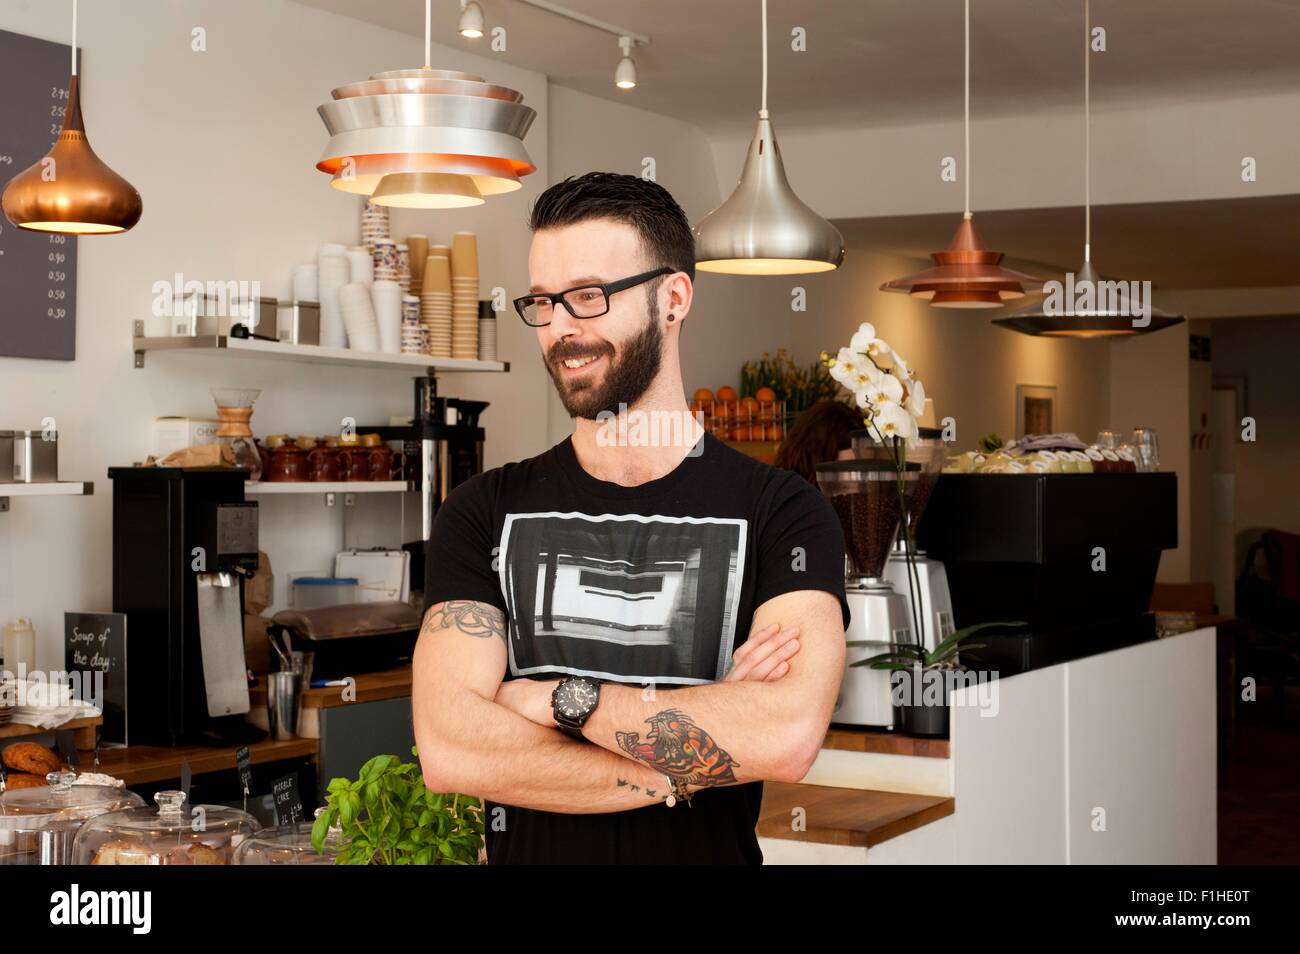 Portrait of cafe waiter with arms folded Stock Photo